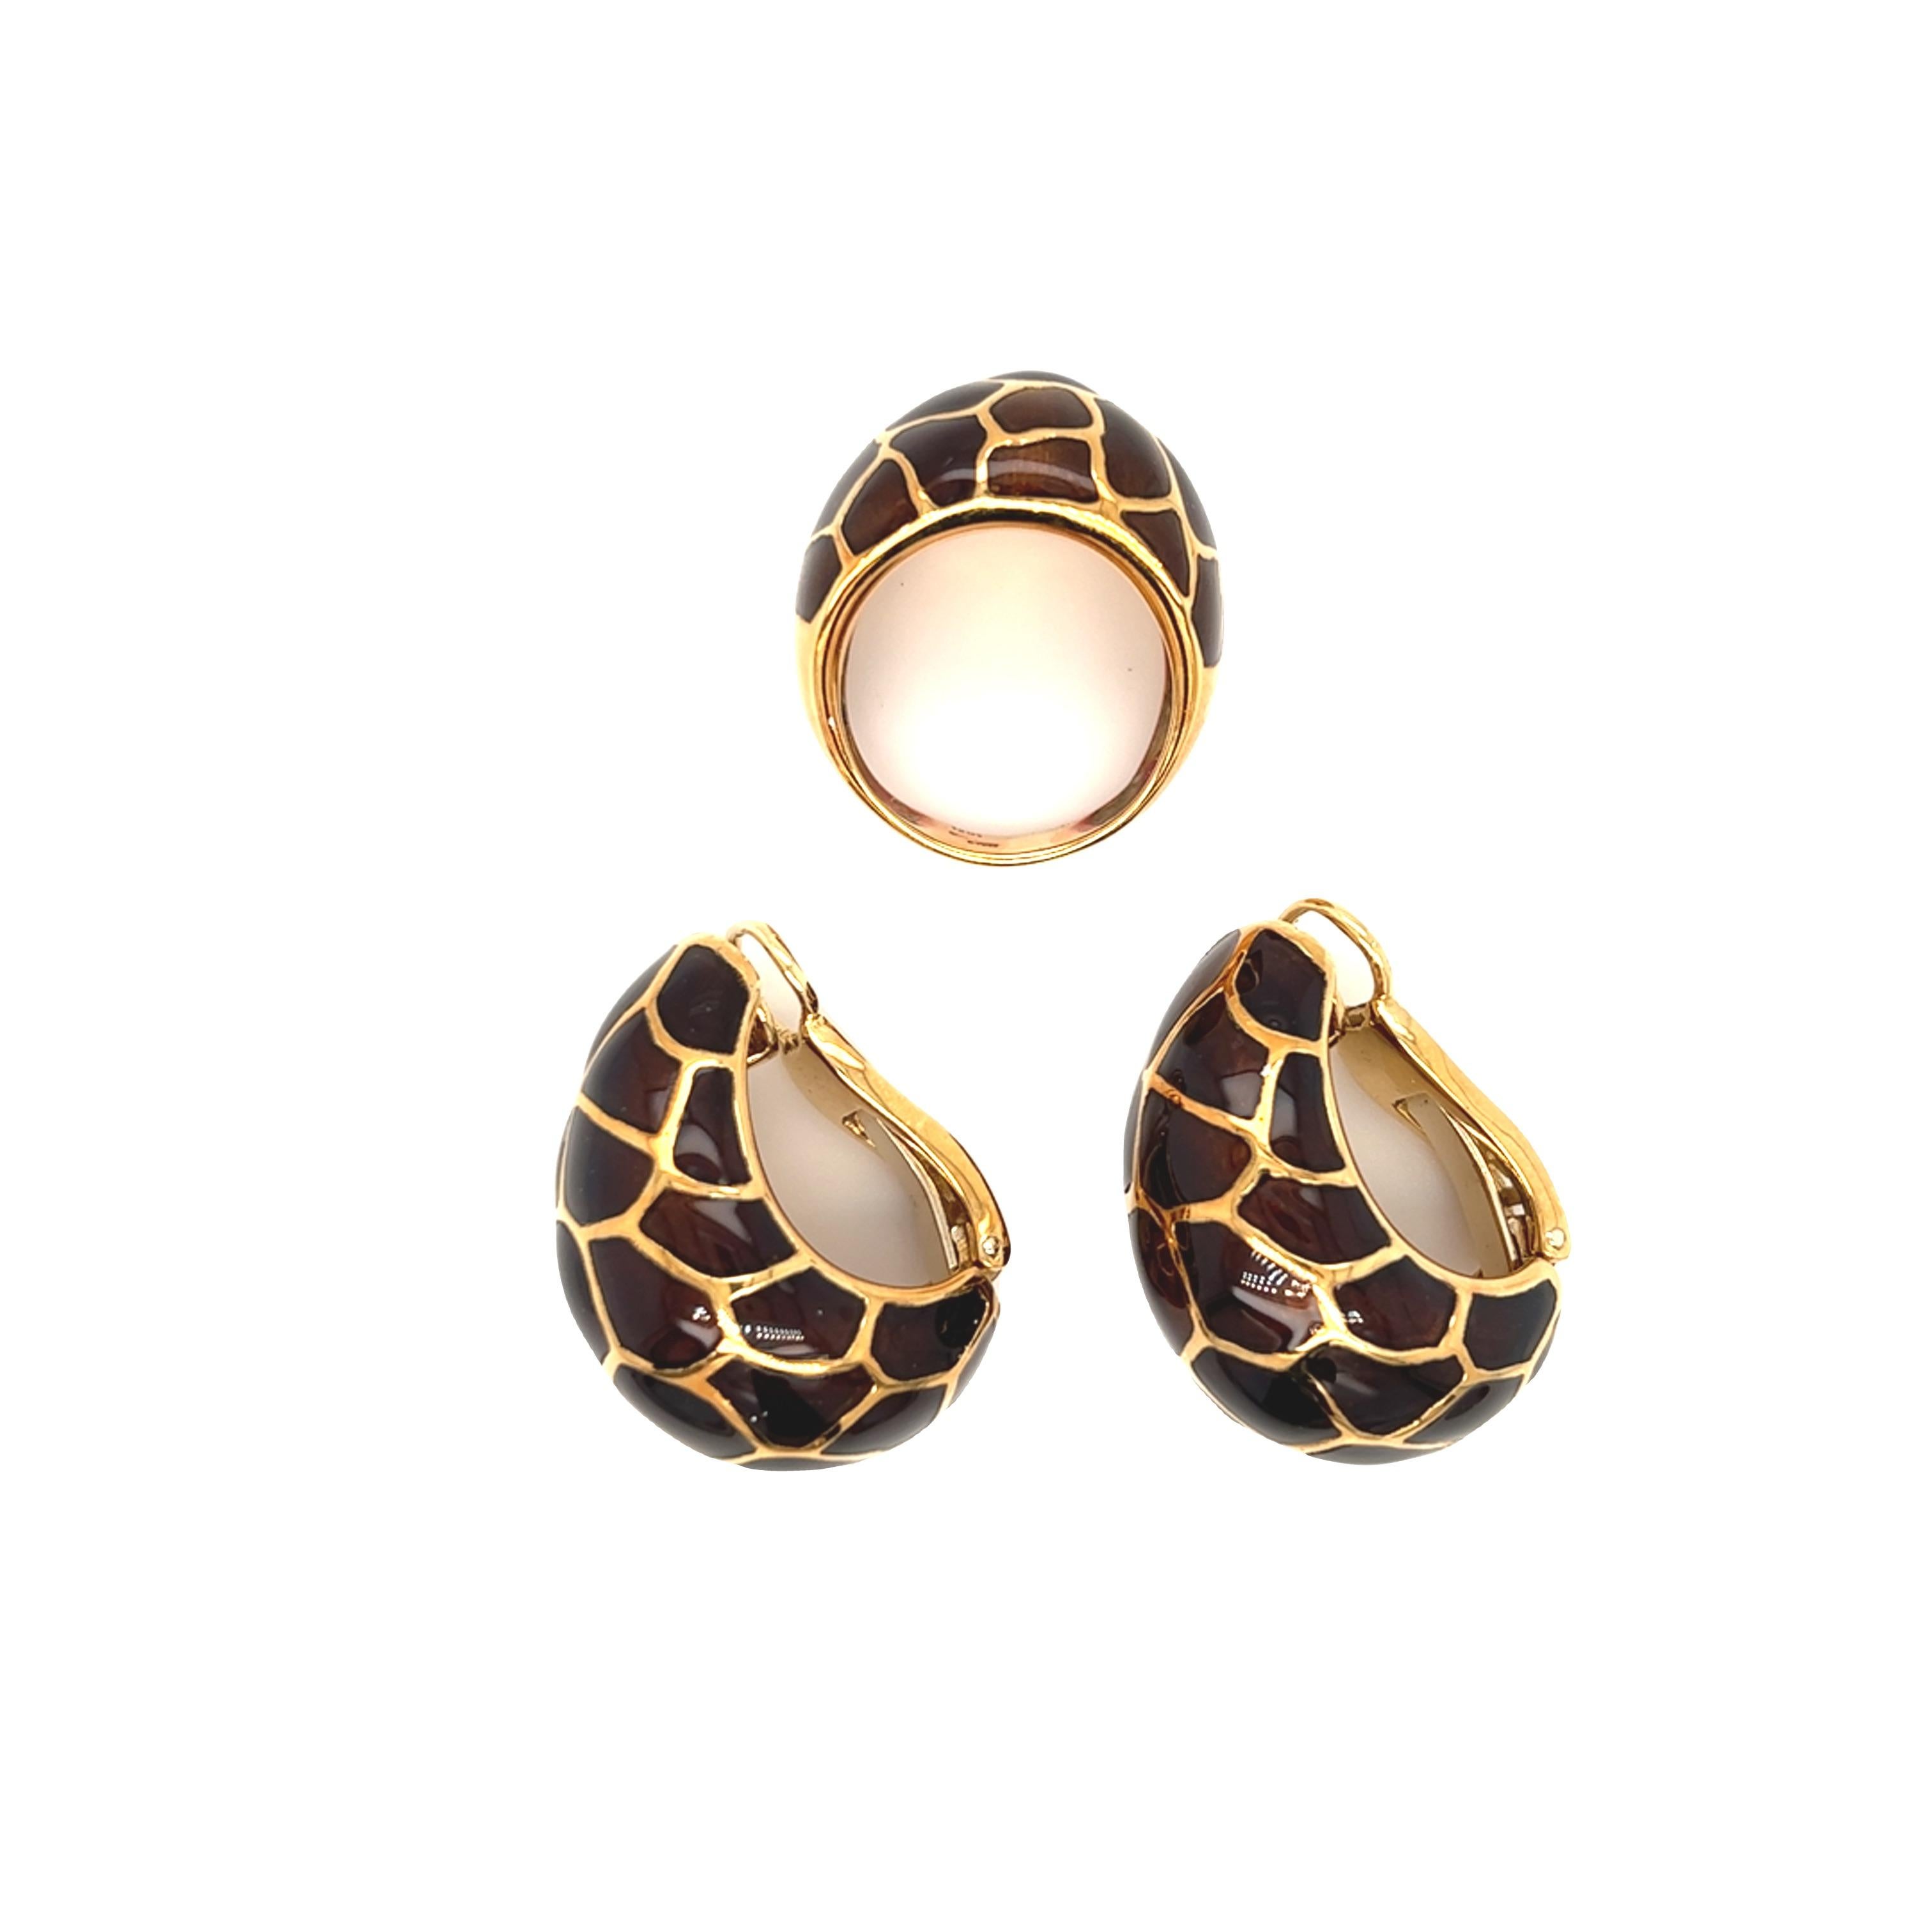 Beautiful and rare find of enamel 18K yellow gold earrings and rings. These 1960s Italian curved earrings weigh 34.2 grams and a matching dome ring weighs 12.2 grams. These pieces are in pristine condition and have been professionally